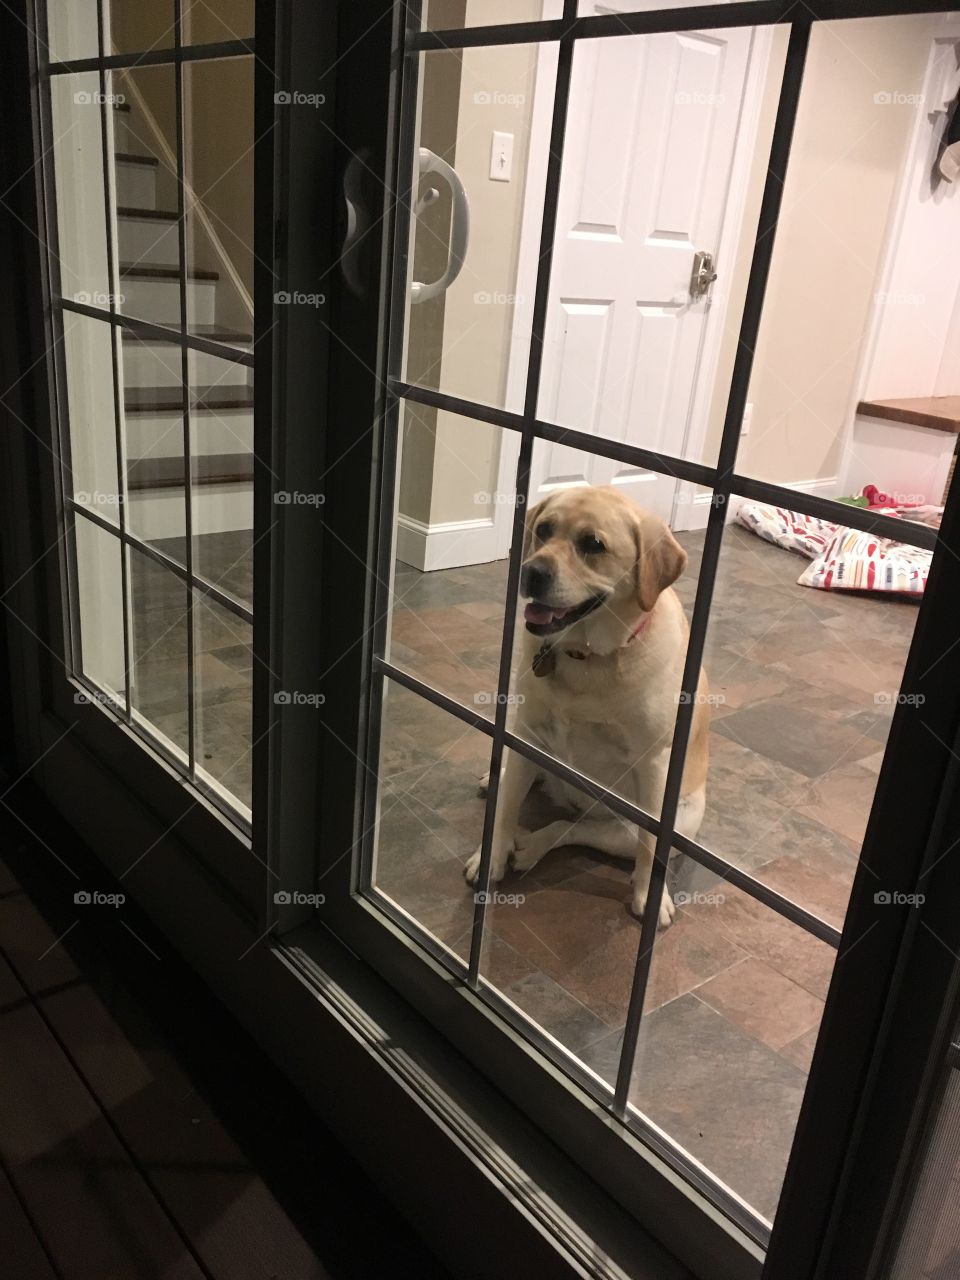 Dog wants to come outside 